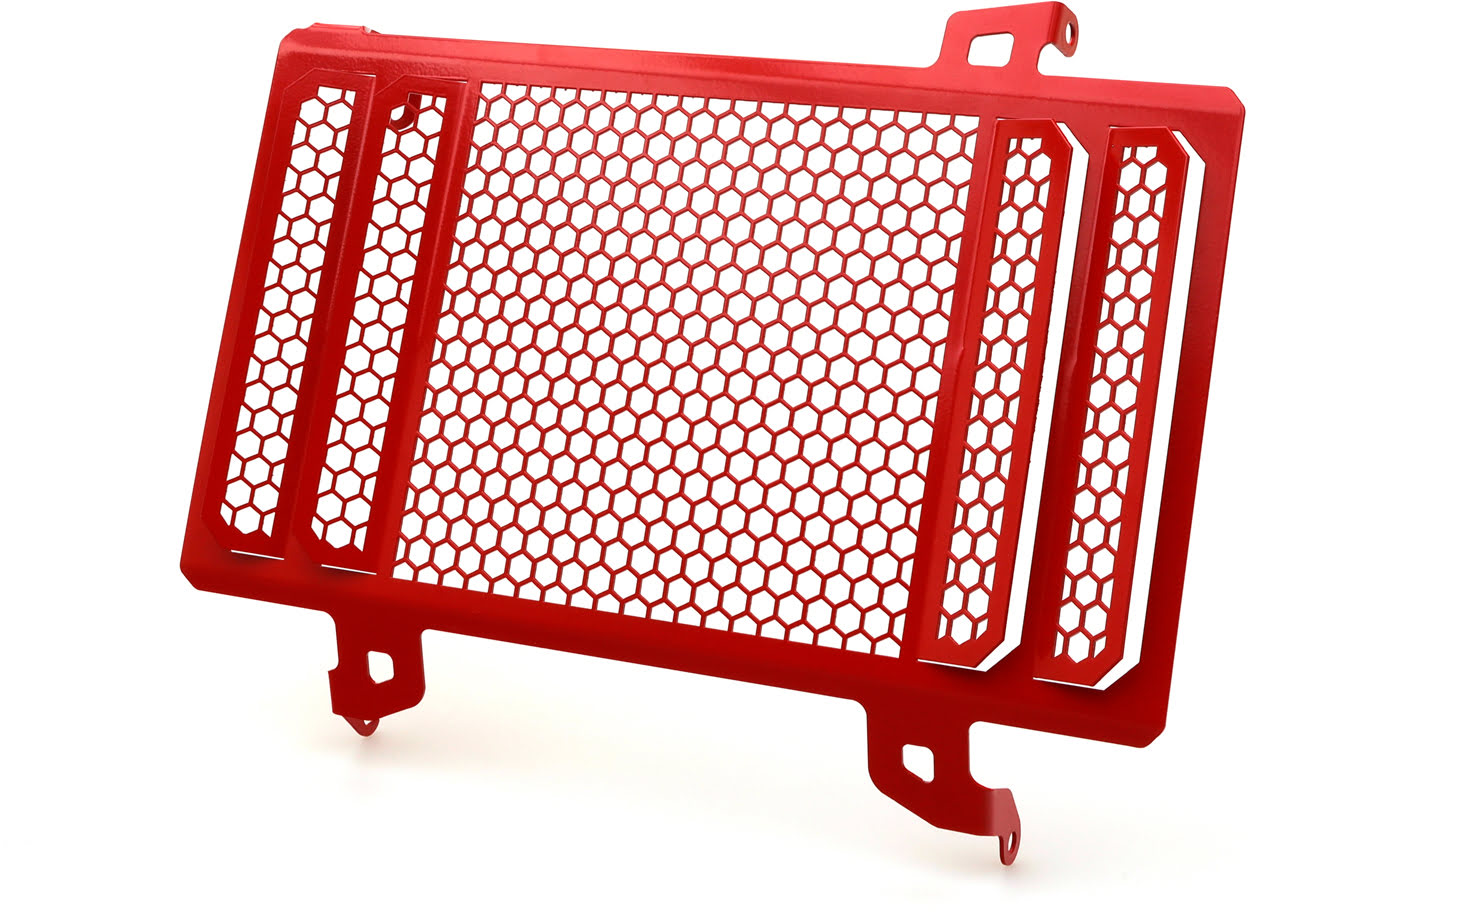 Trail Radiator Protection Grids - 2CP22700650007.JPG